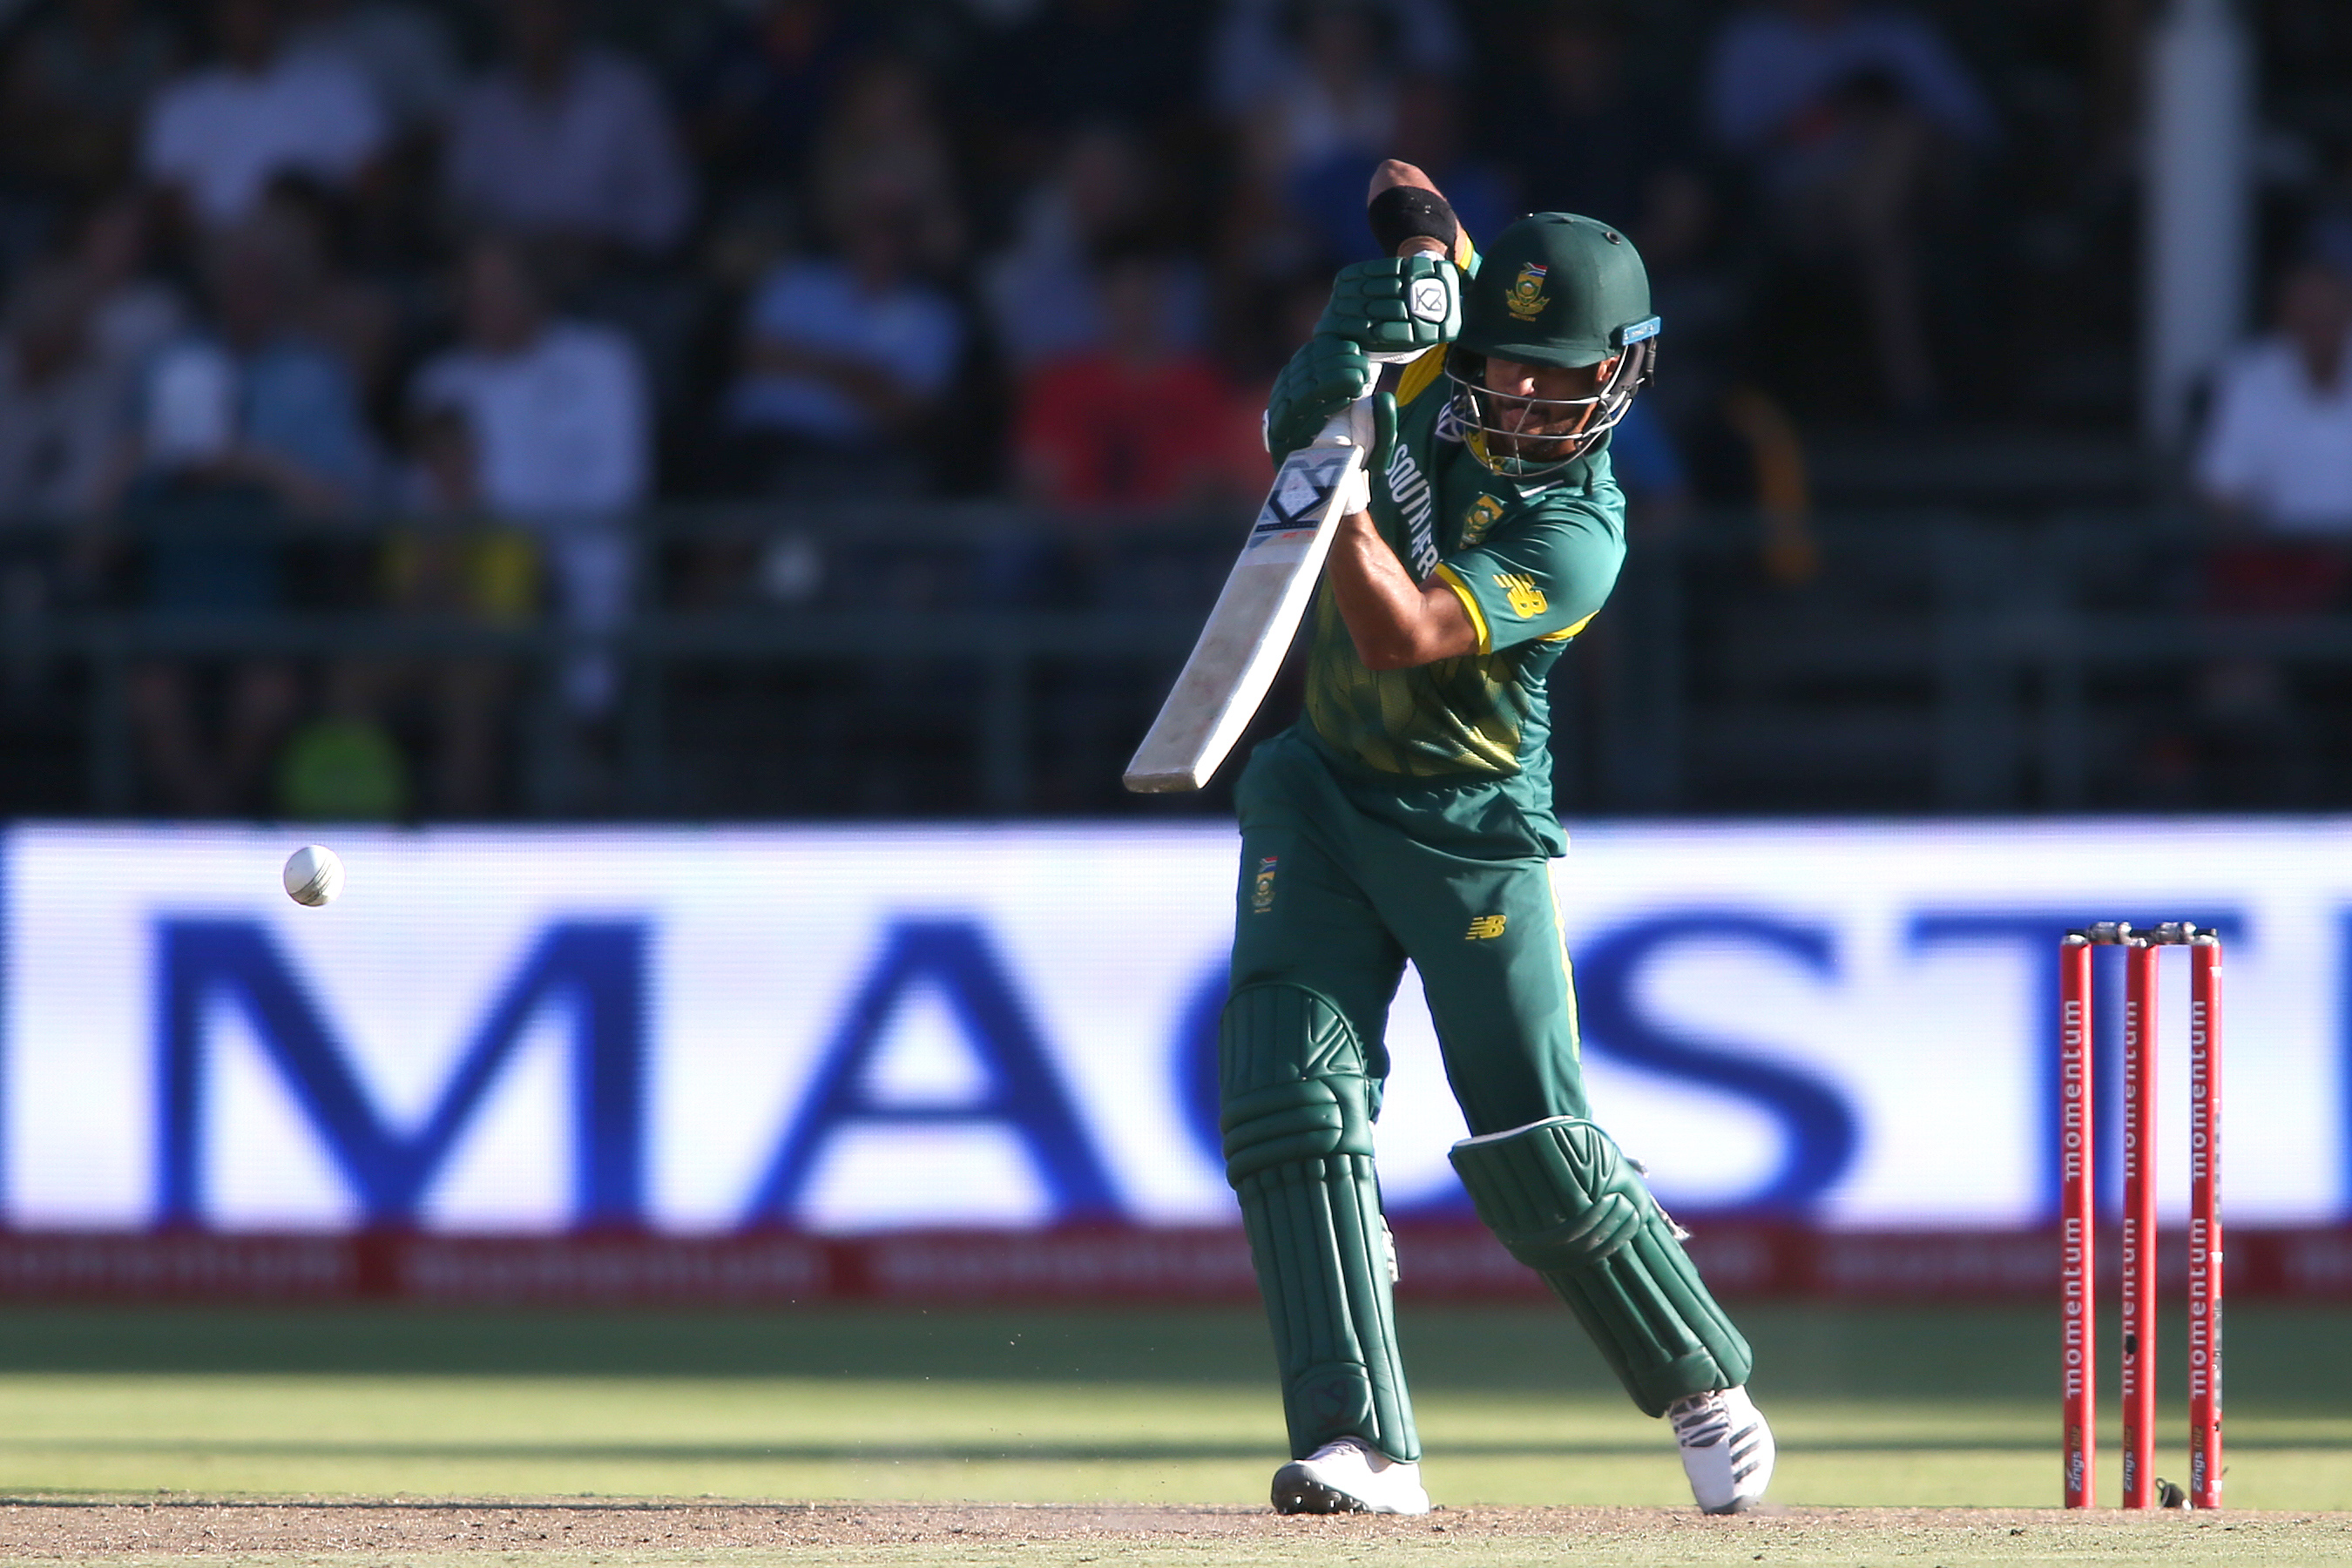 ICC World Cup 2019 | The biggest disappointment is the team’s performance, says JP Duminy